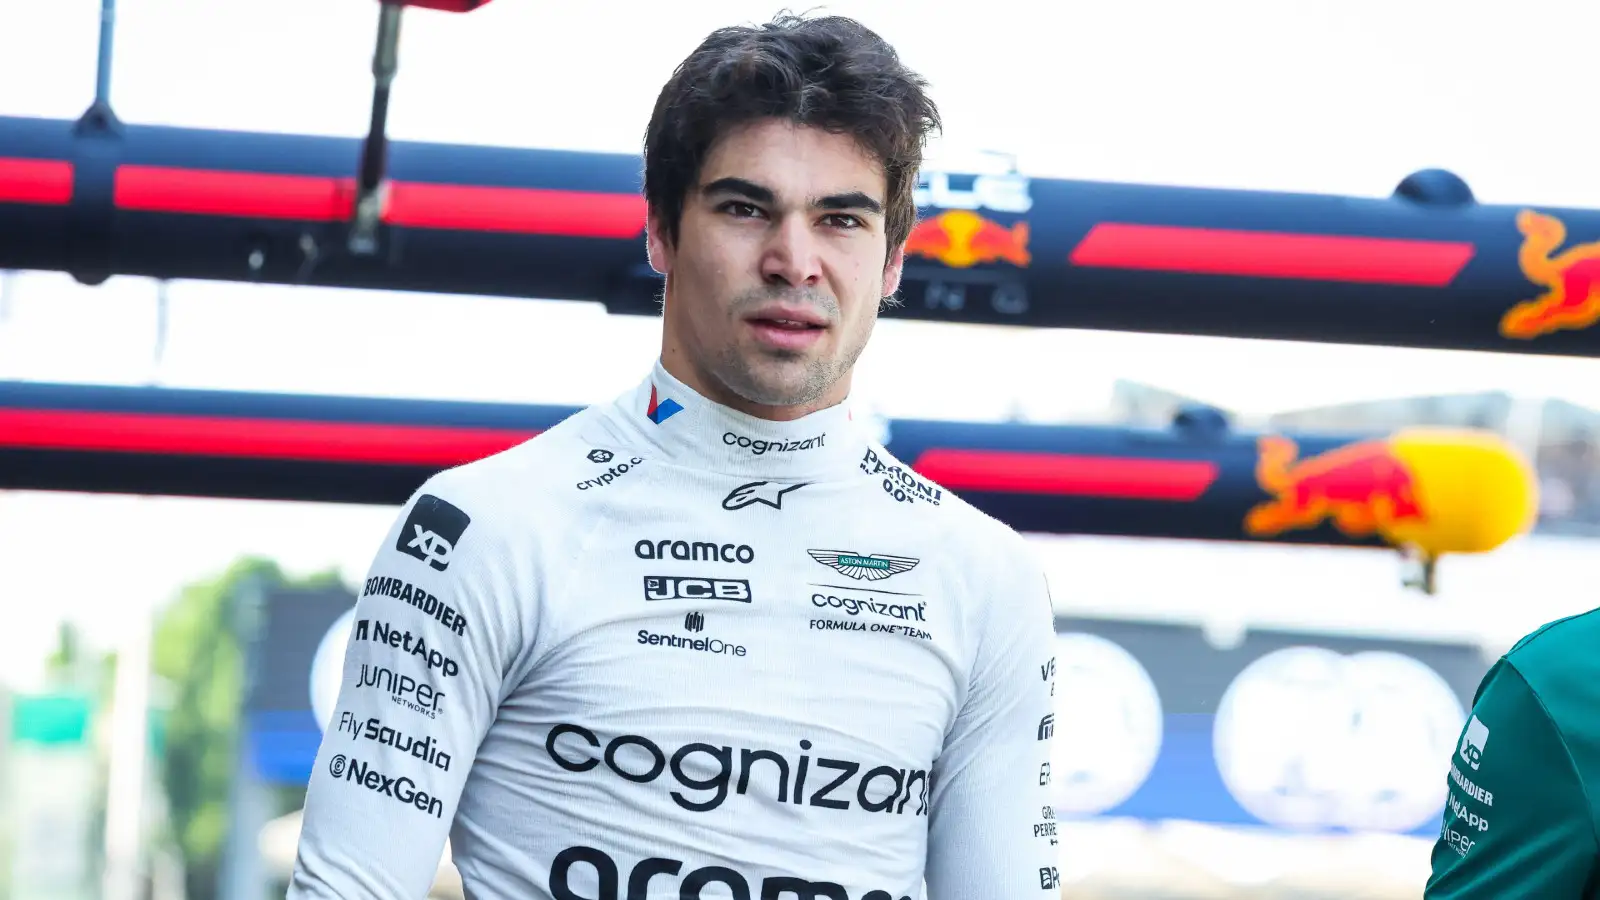 Aston Martin F1 driver Lance Stroll pictured in the pitlane during the Mexican Grand Prix weekend.